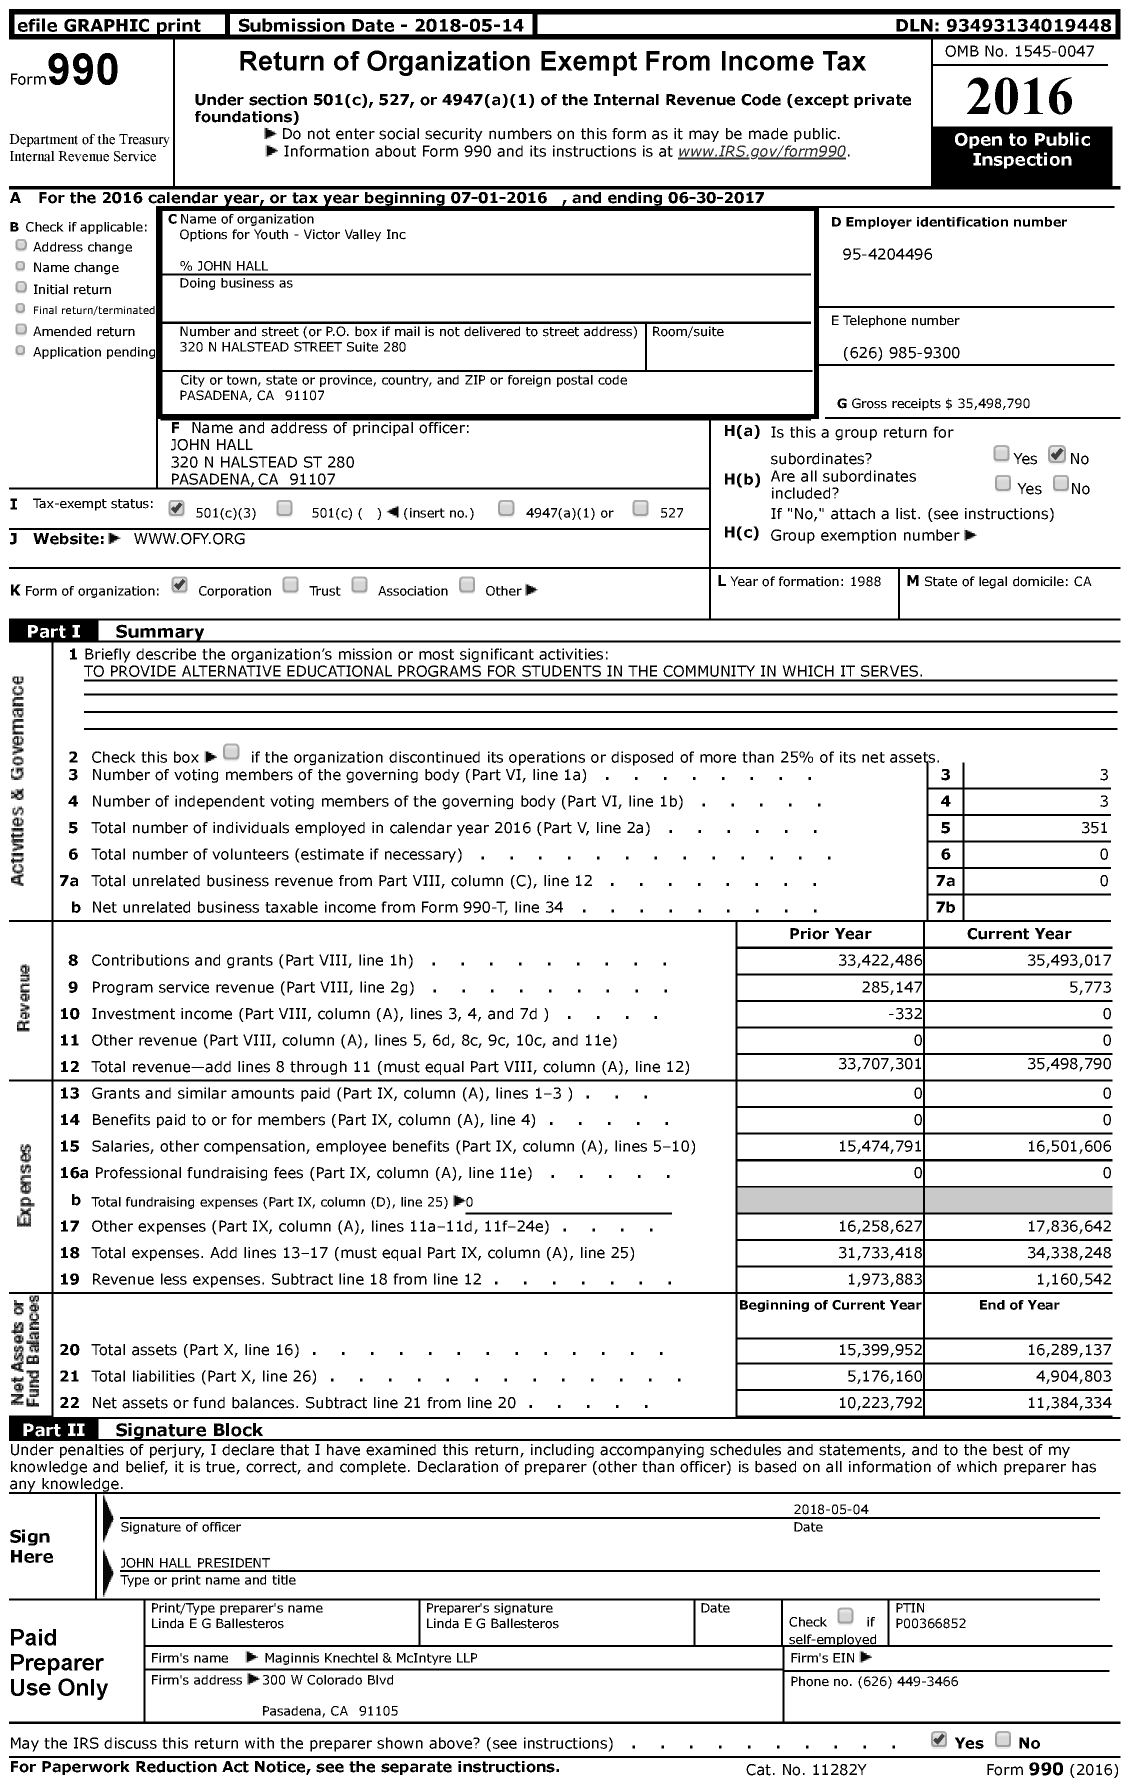 Image of first page of 2016 Form 990 for Options For YOUTH (OFY)